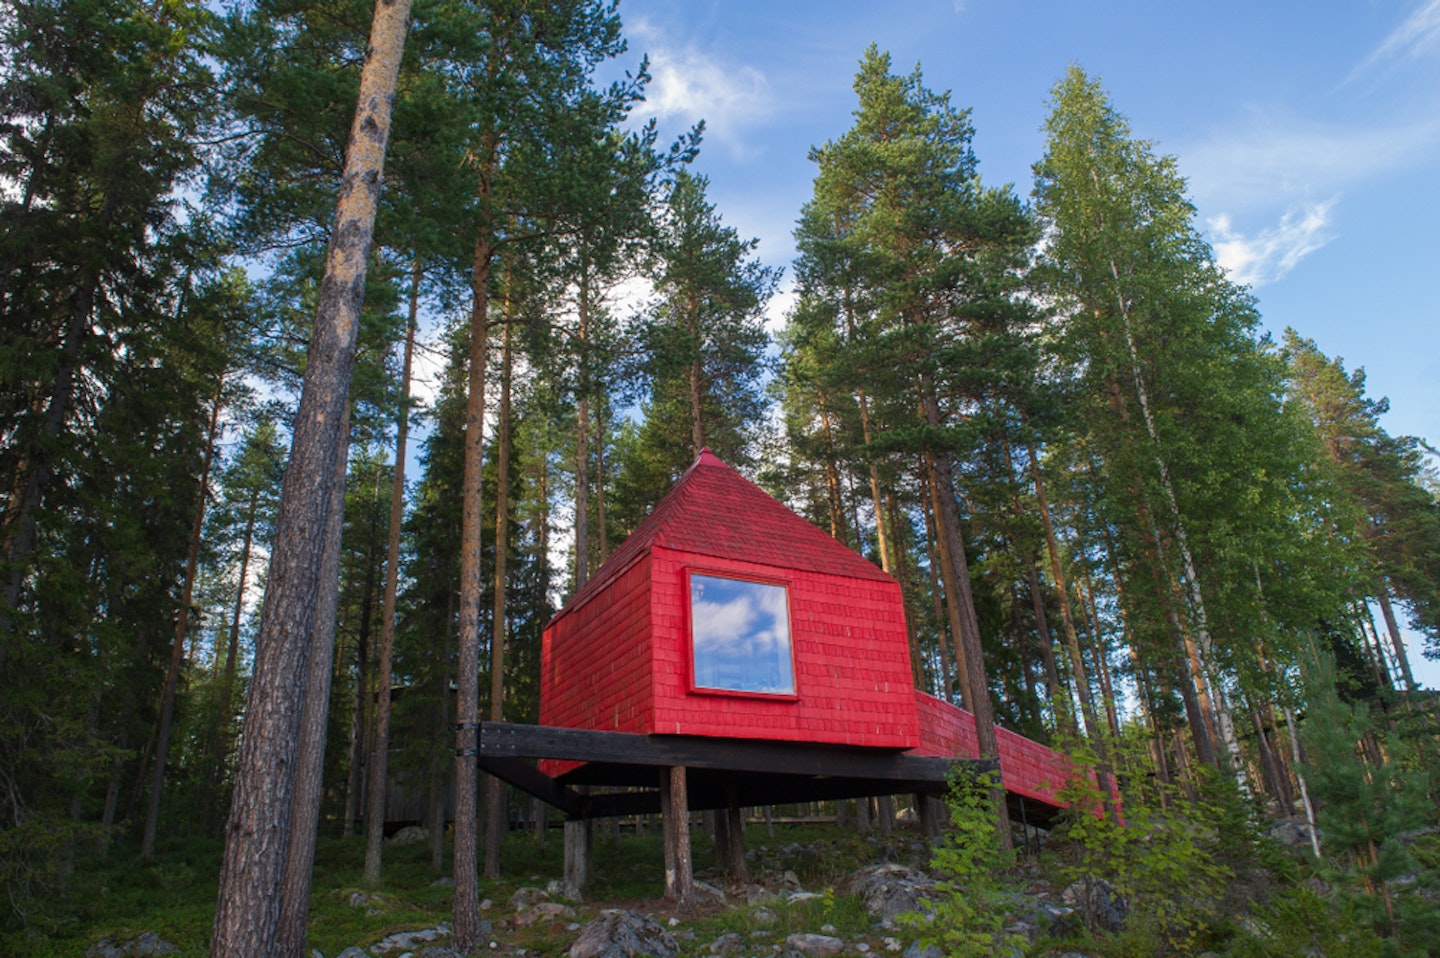 Cabins That Will Make You Want The Simple Life